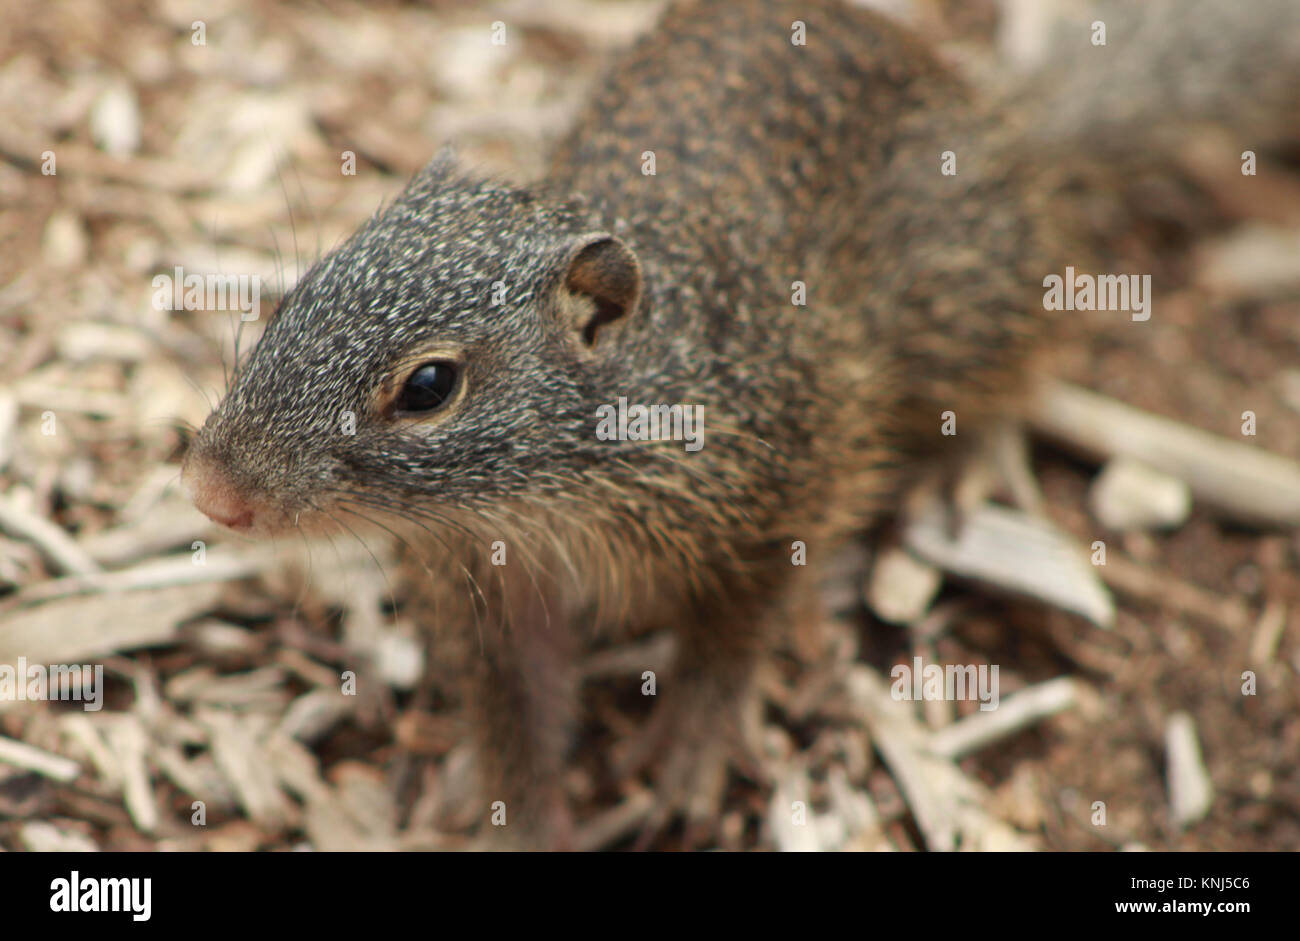 A Squirrel at the Omaha Zoo during midday with a simplistic background.. Stock Photo